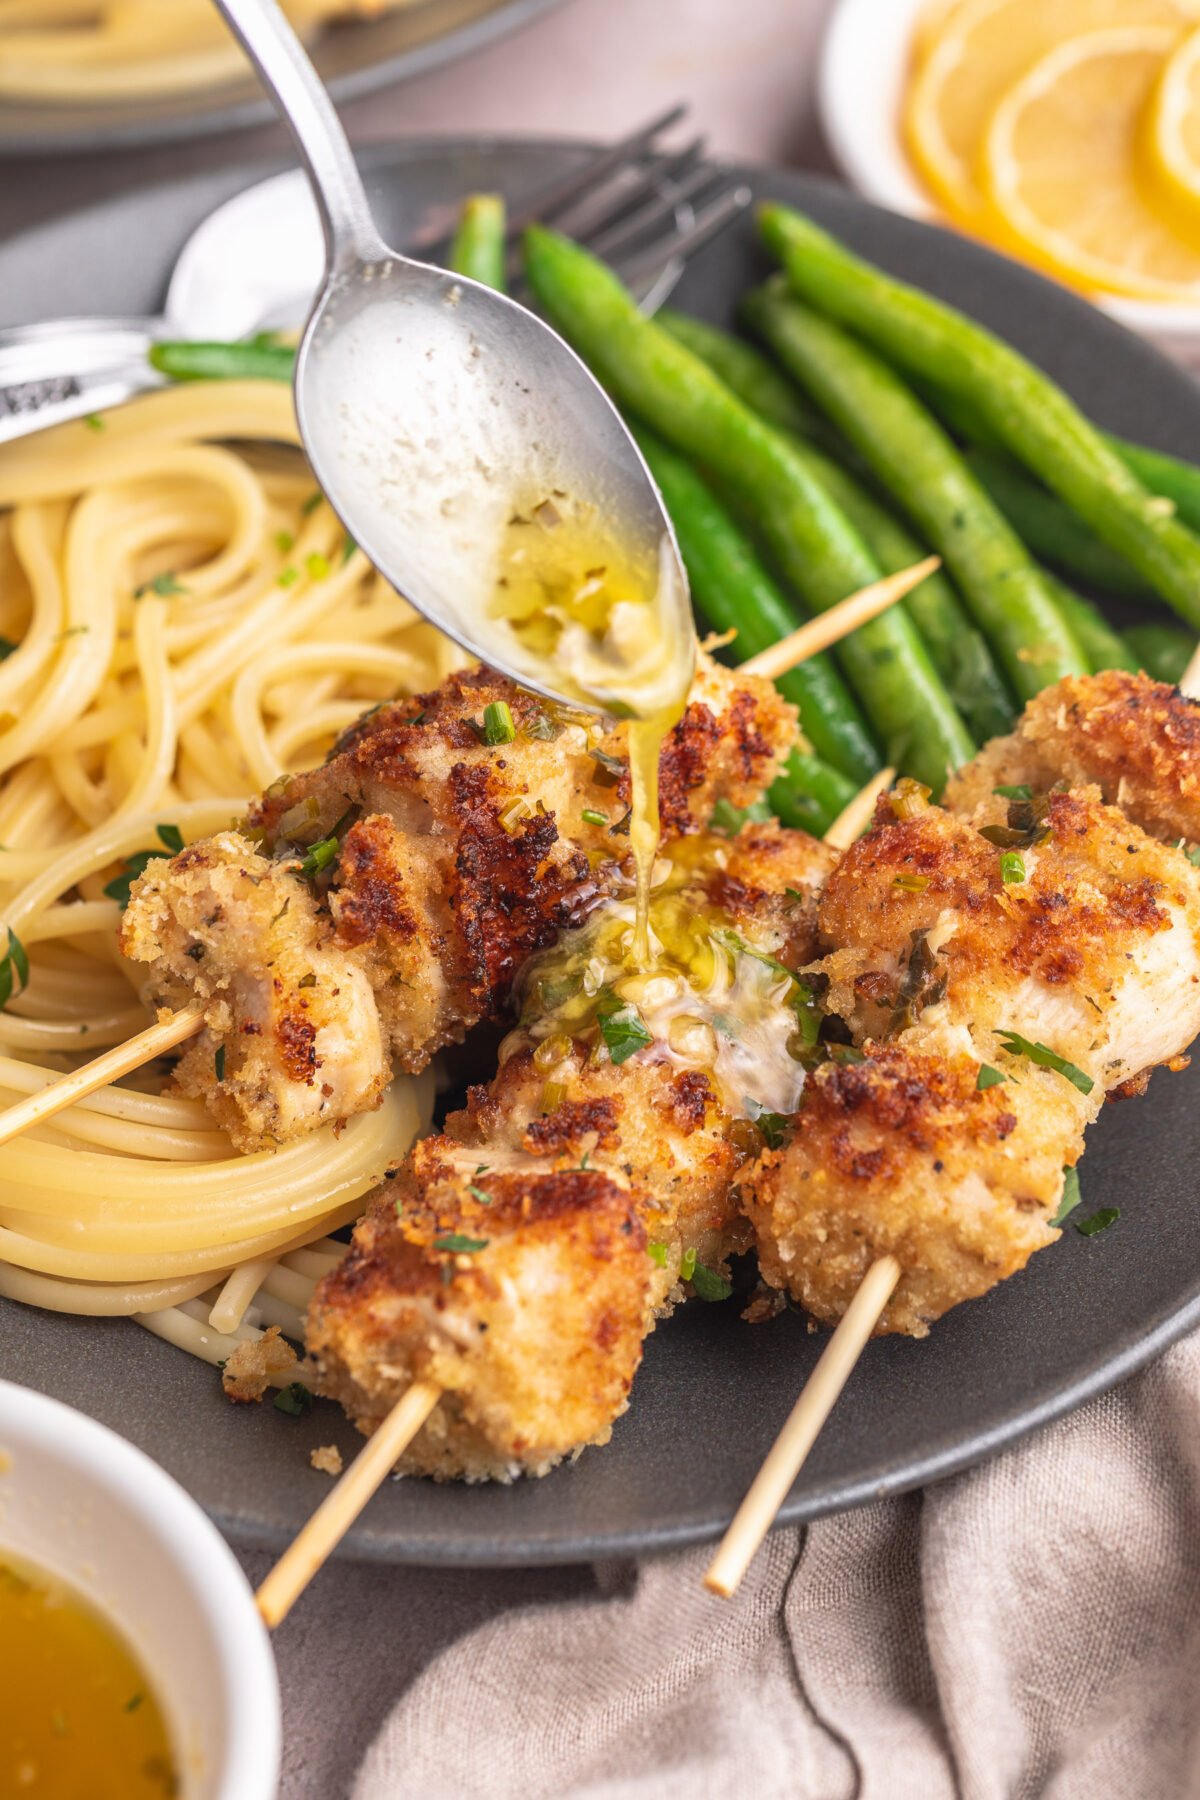 Herb butter sauce being drizzled over three chicken spiedini skewers plated with angel hair pasta and bright green beans.